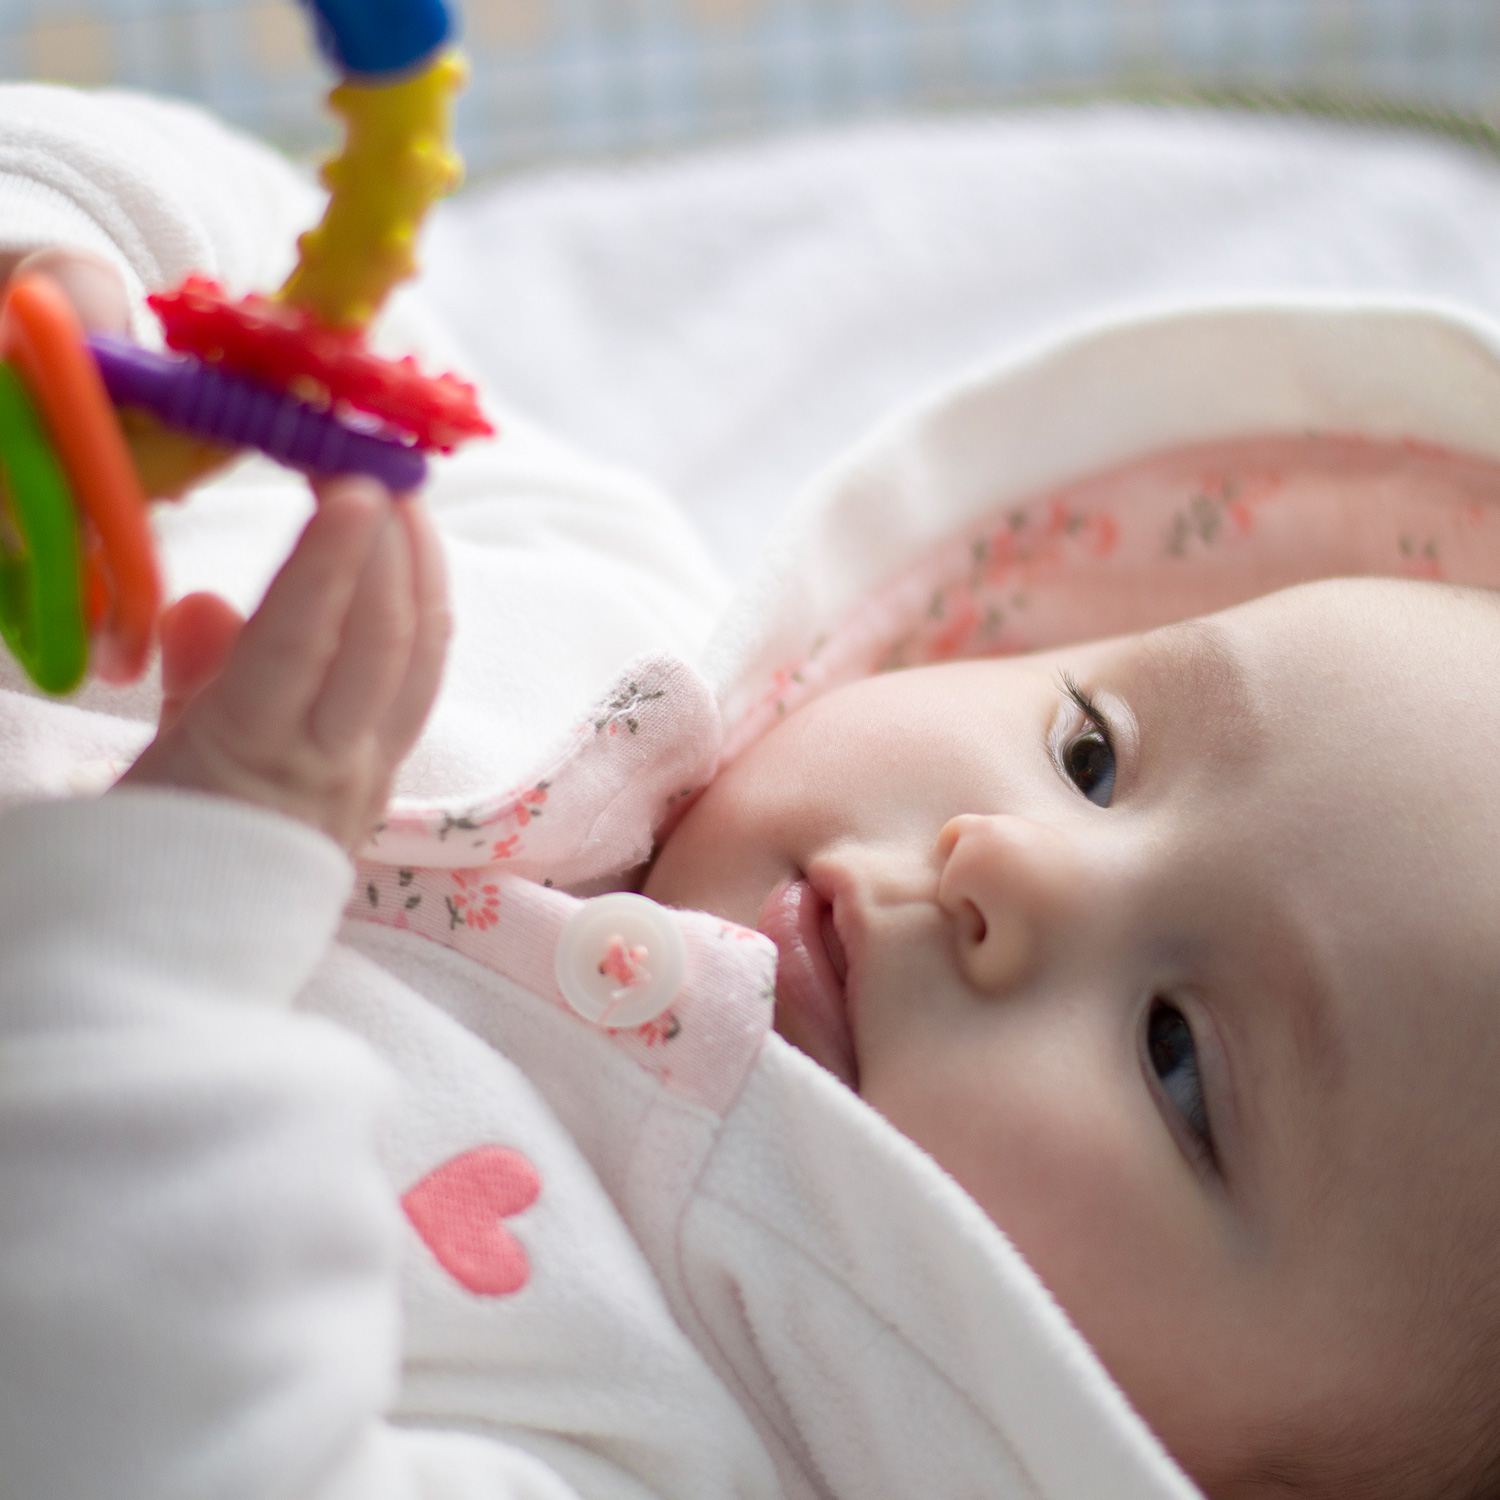 How to promote early language skills in infants.